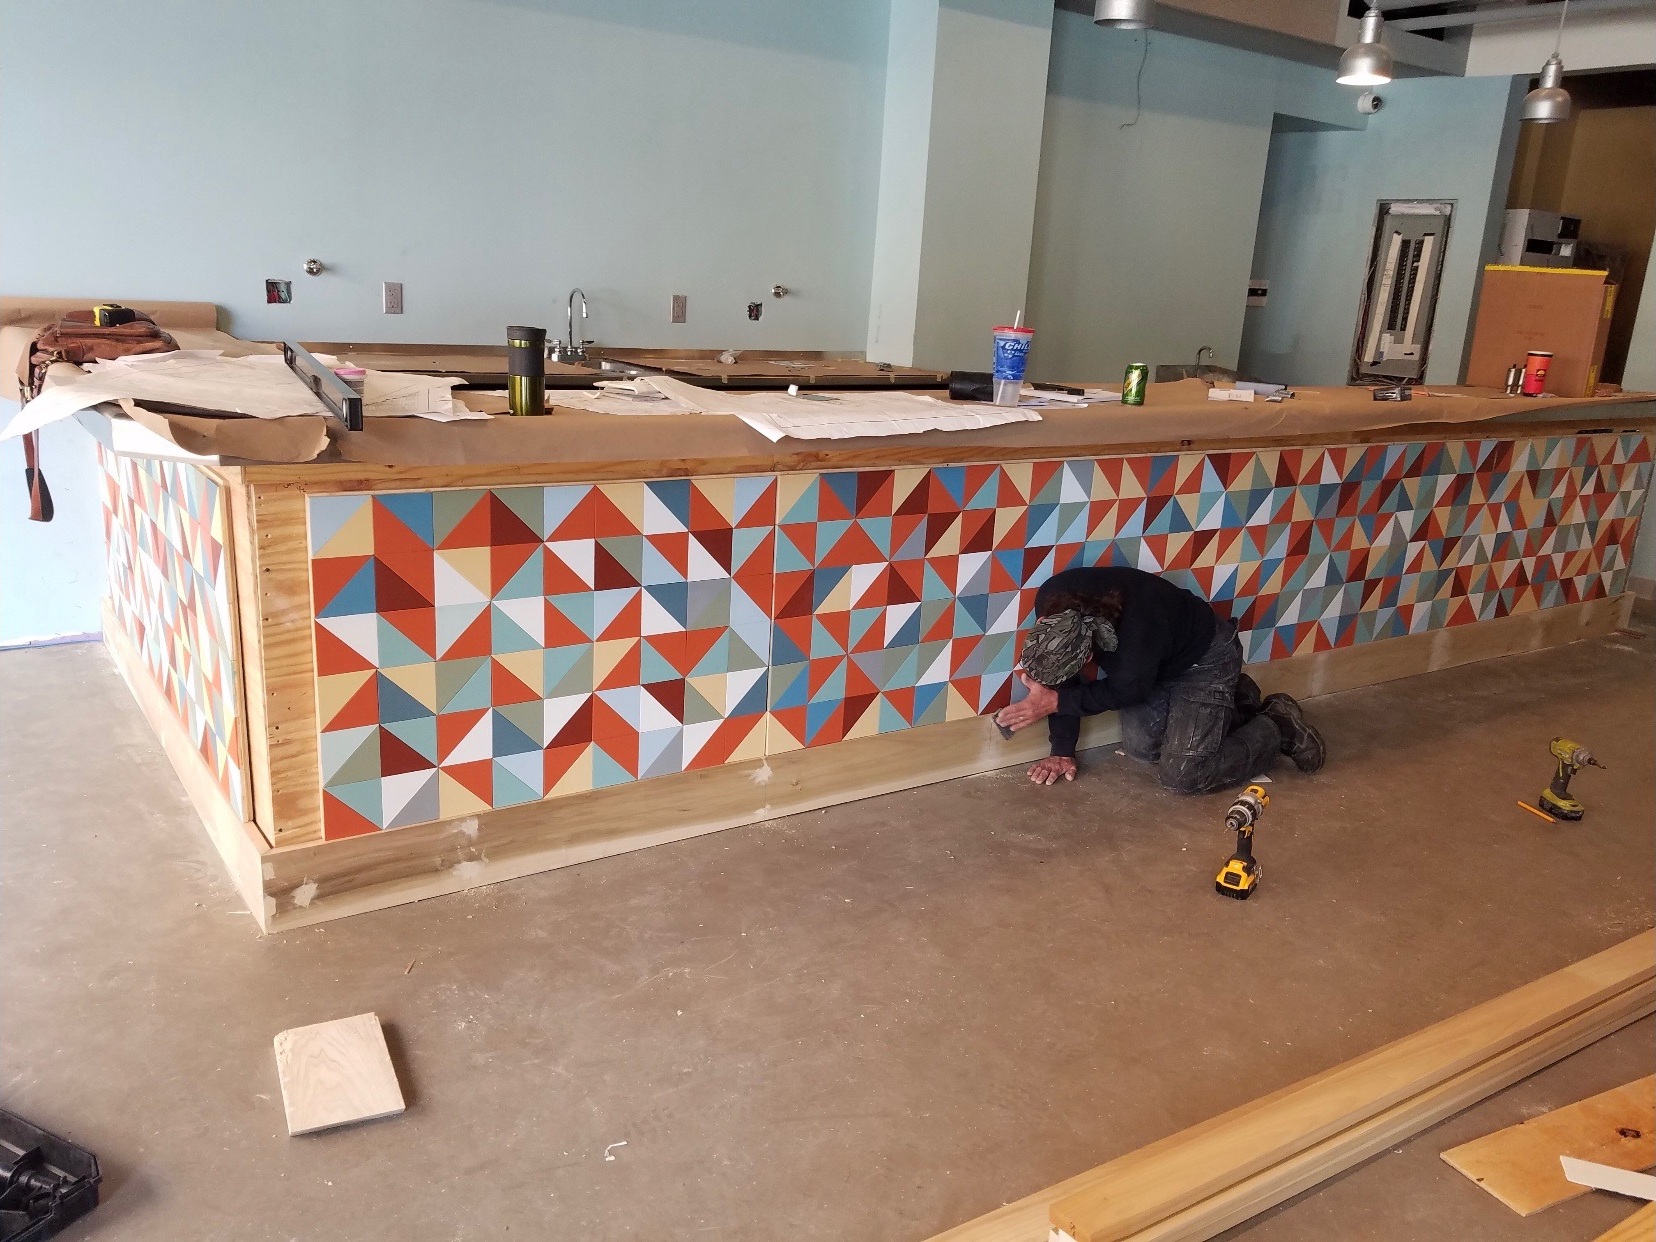  Carpenter trimming out the bar after installation. 